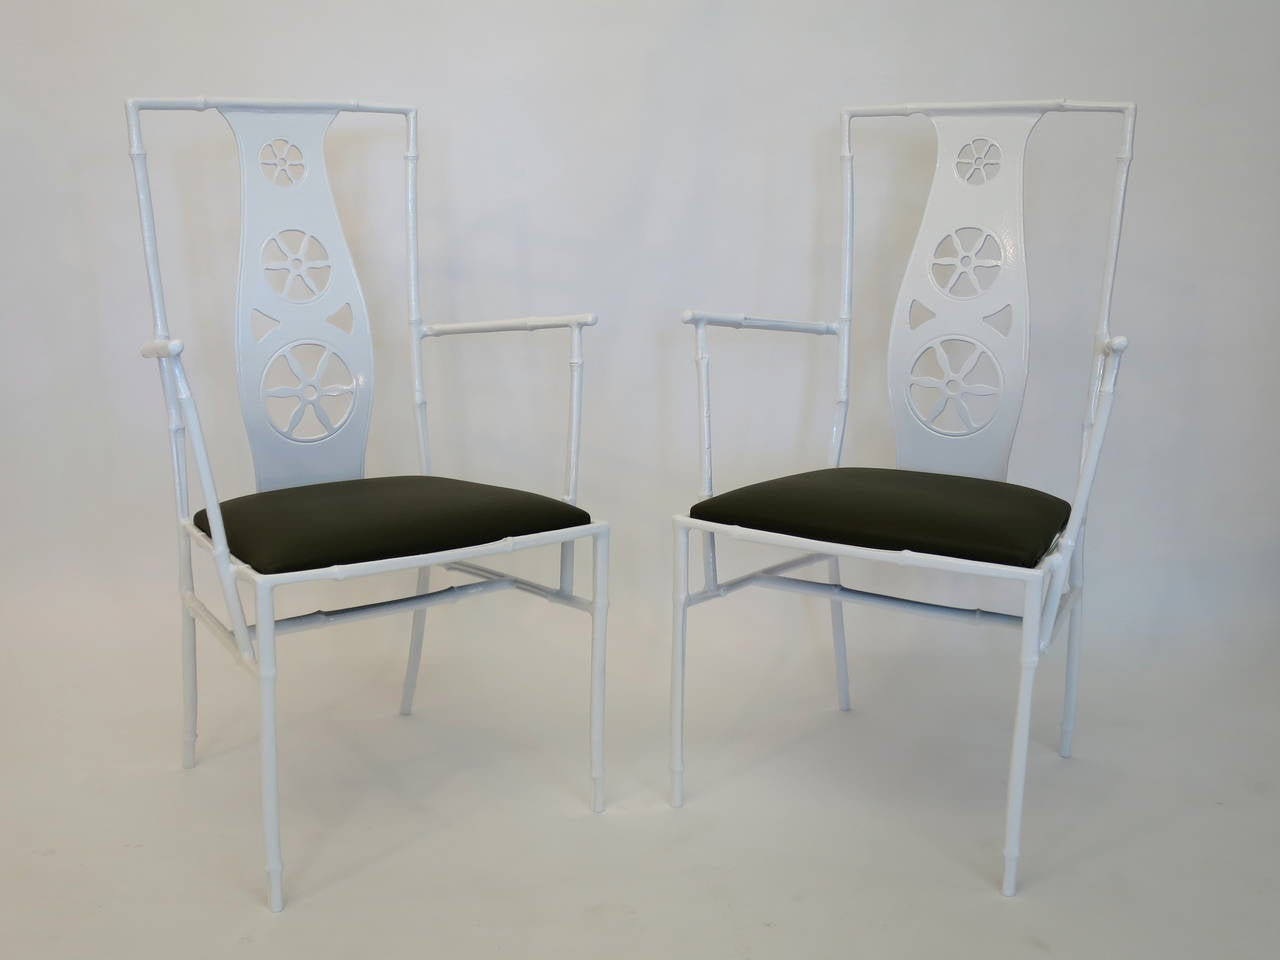 Pair of 'Montego' chairs by John Salterini. Powder coated aluminum with pinwheel backs and upholstered seats. Restored condition. Perfect for indoor and outdoor use, circa 1960s.